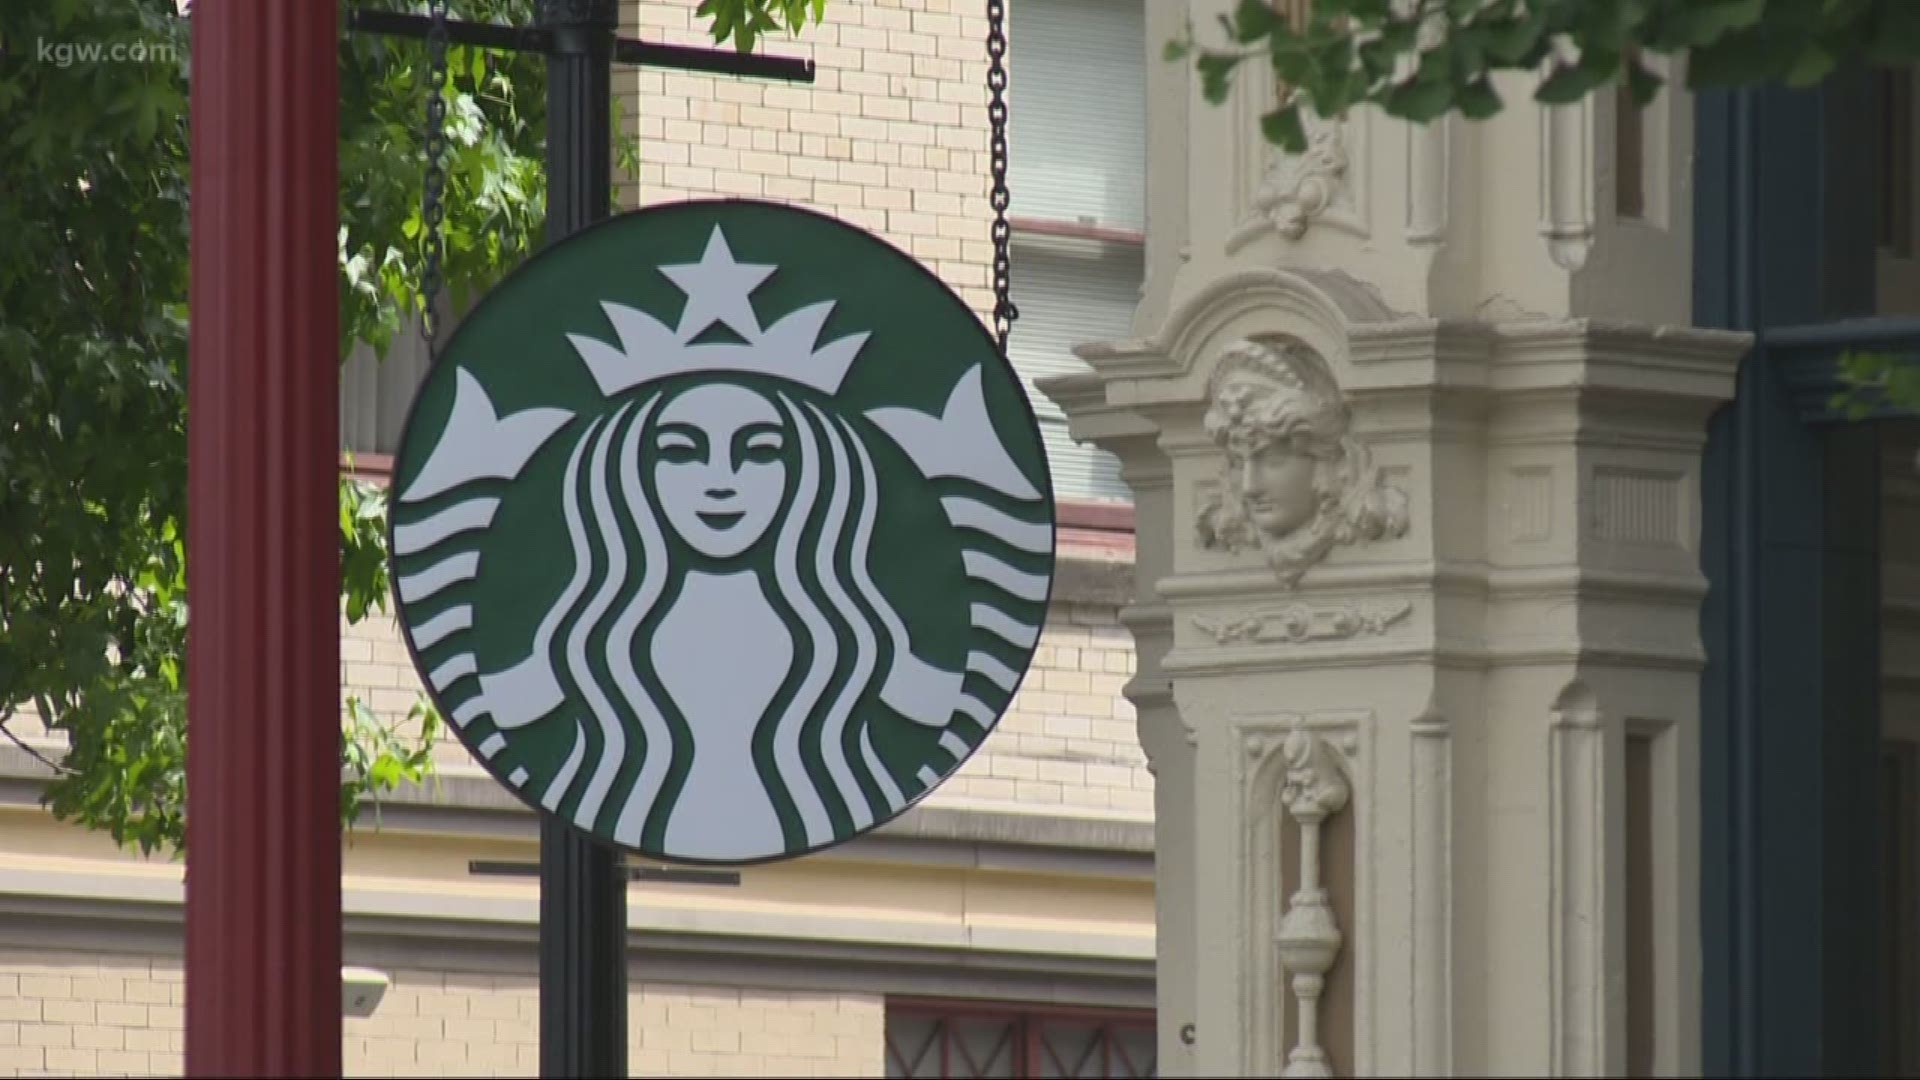 How does Starbucks' policy affect homeless?